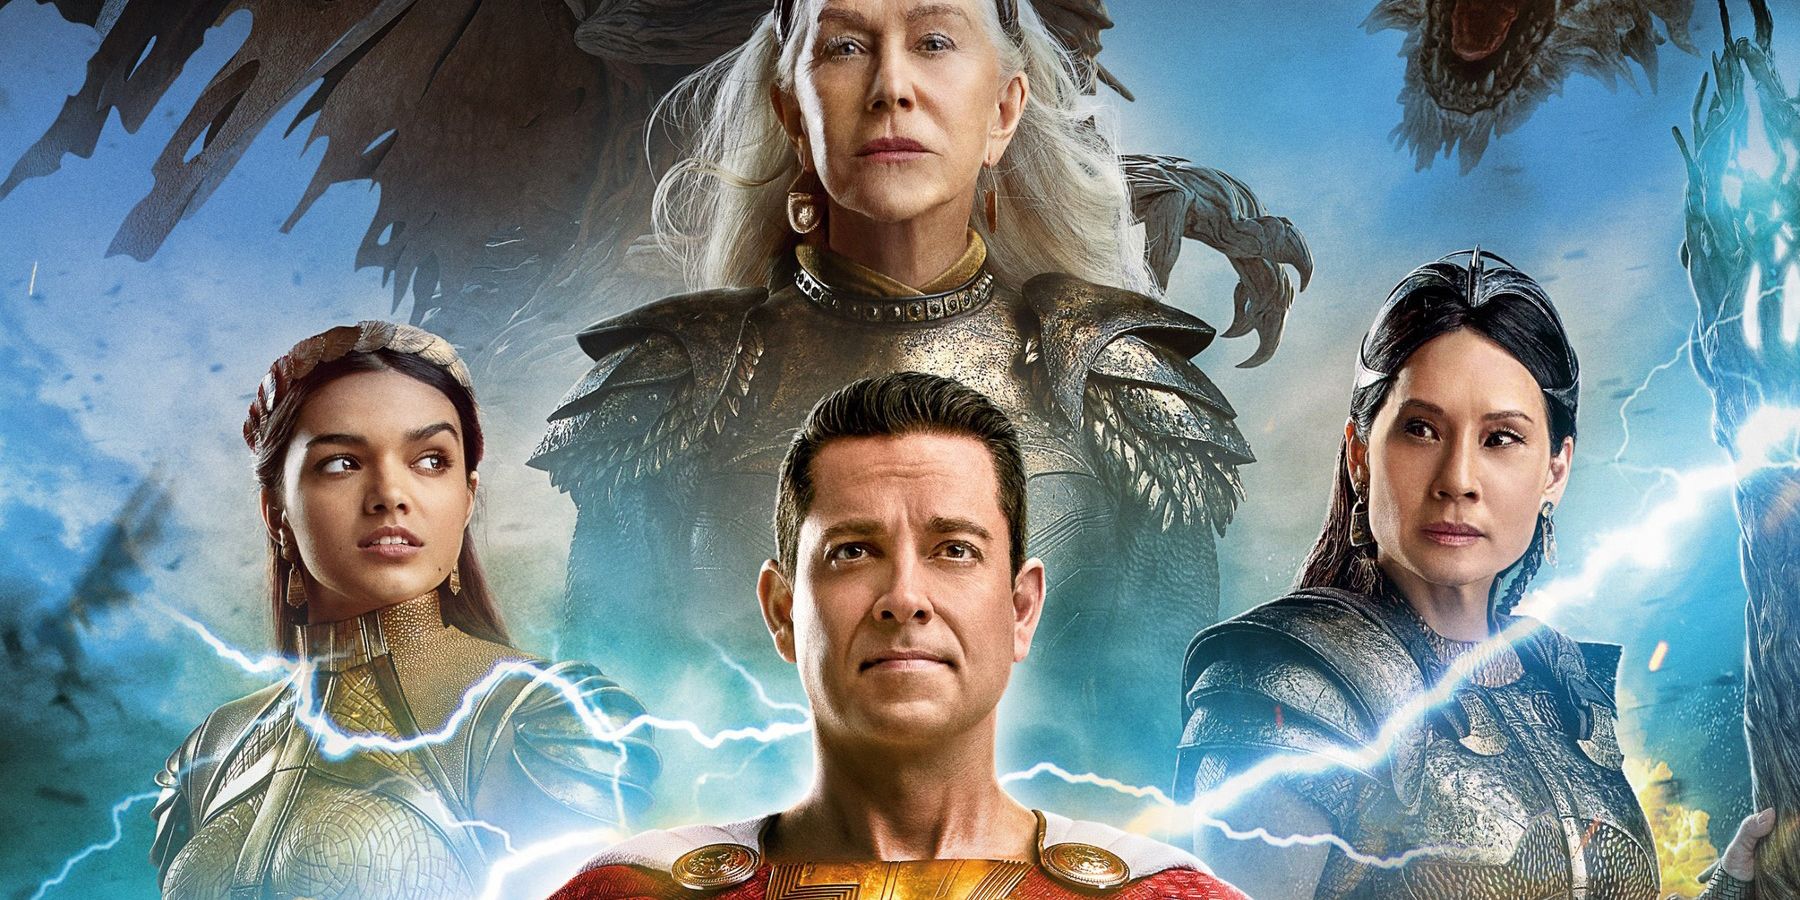 How is Shazam! Fury of the Gods doing at the box office? - Quora